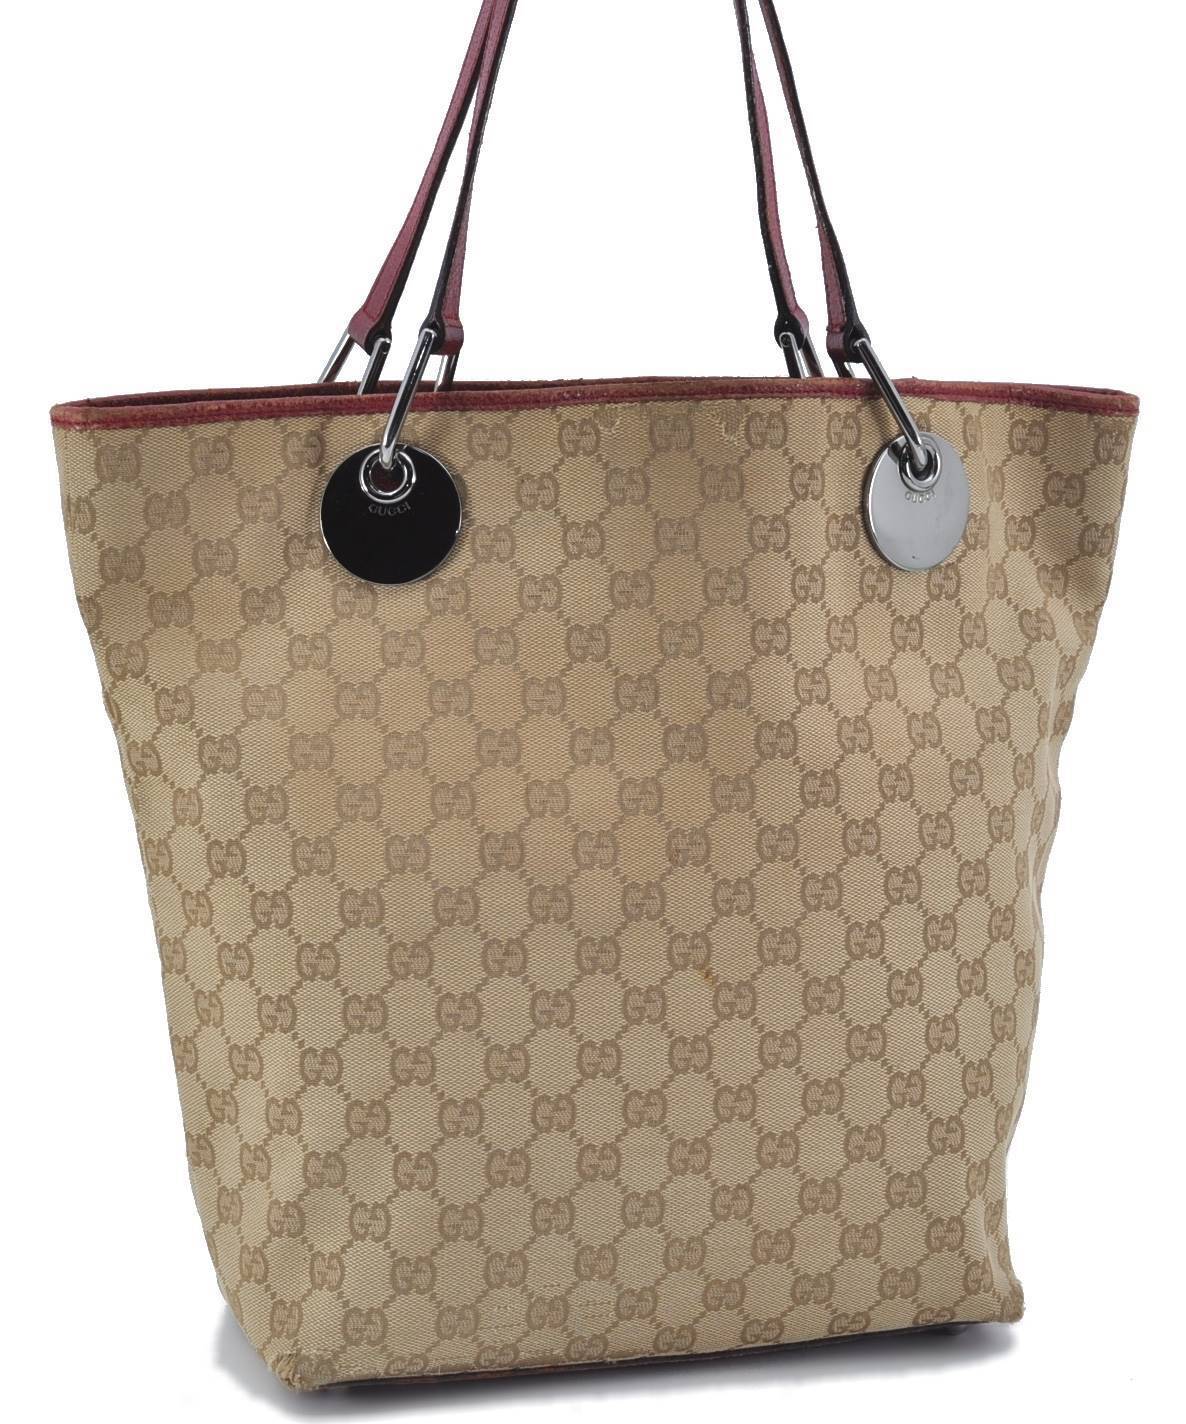 Auth GUCCI Eclipse Shoulder Tote Bag GG Canvas Leather 120836 Beige Red H1404